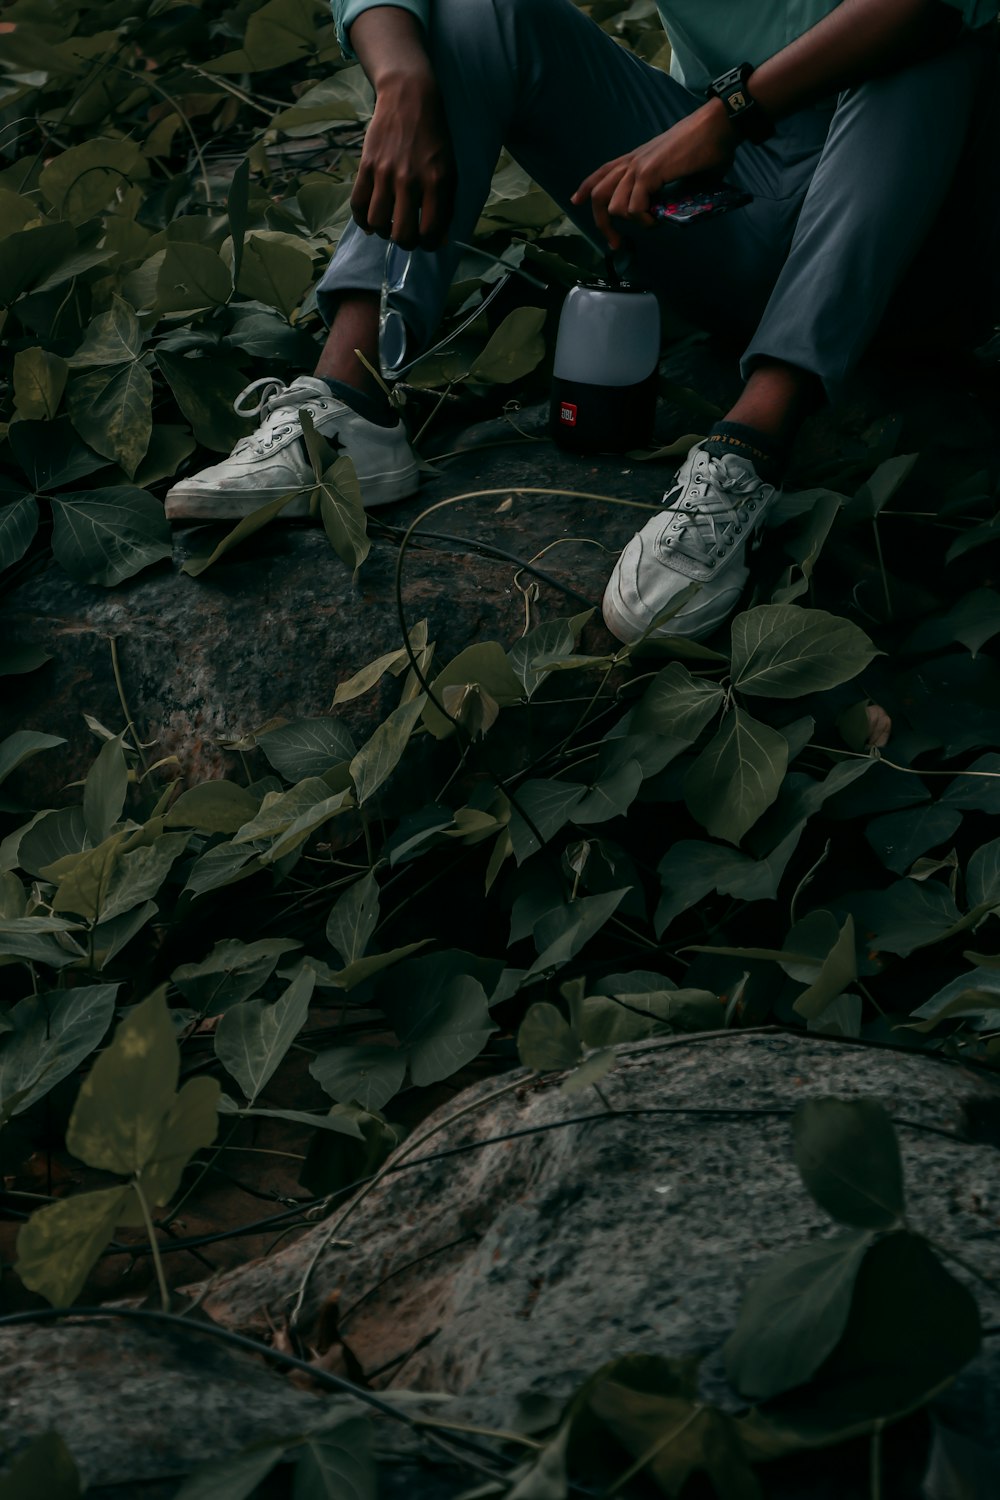 person in black and white sneakers standing on green leaves